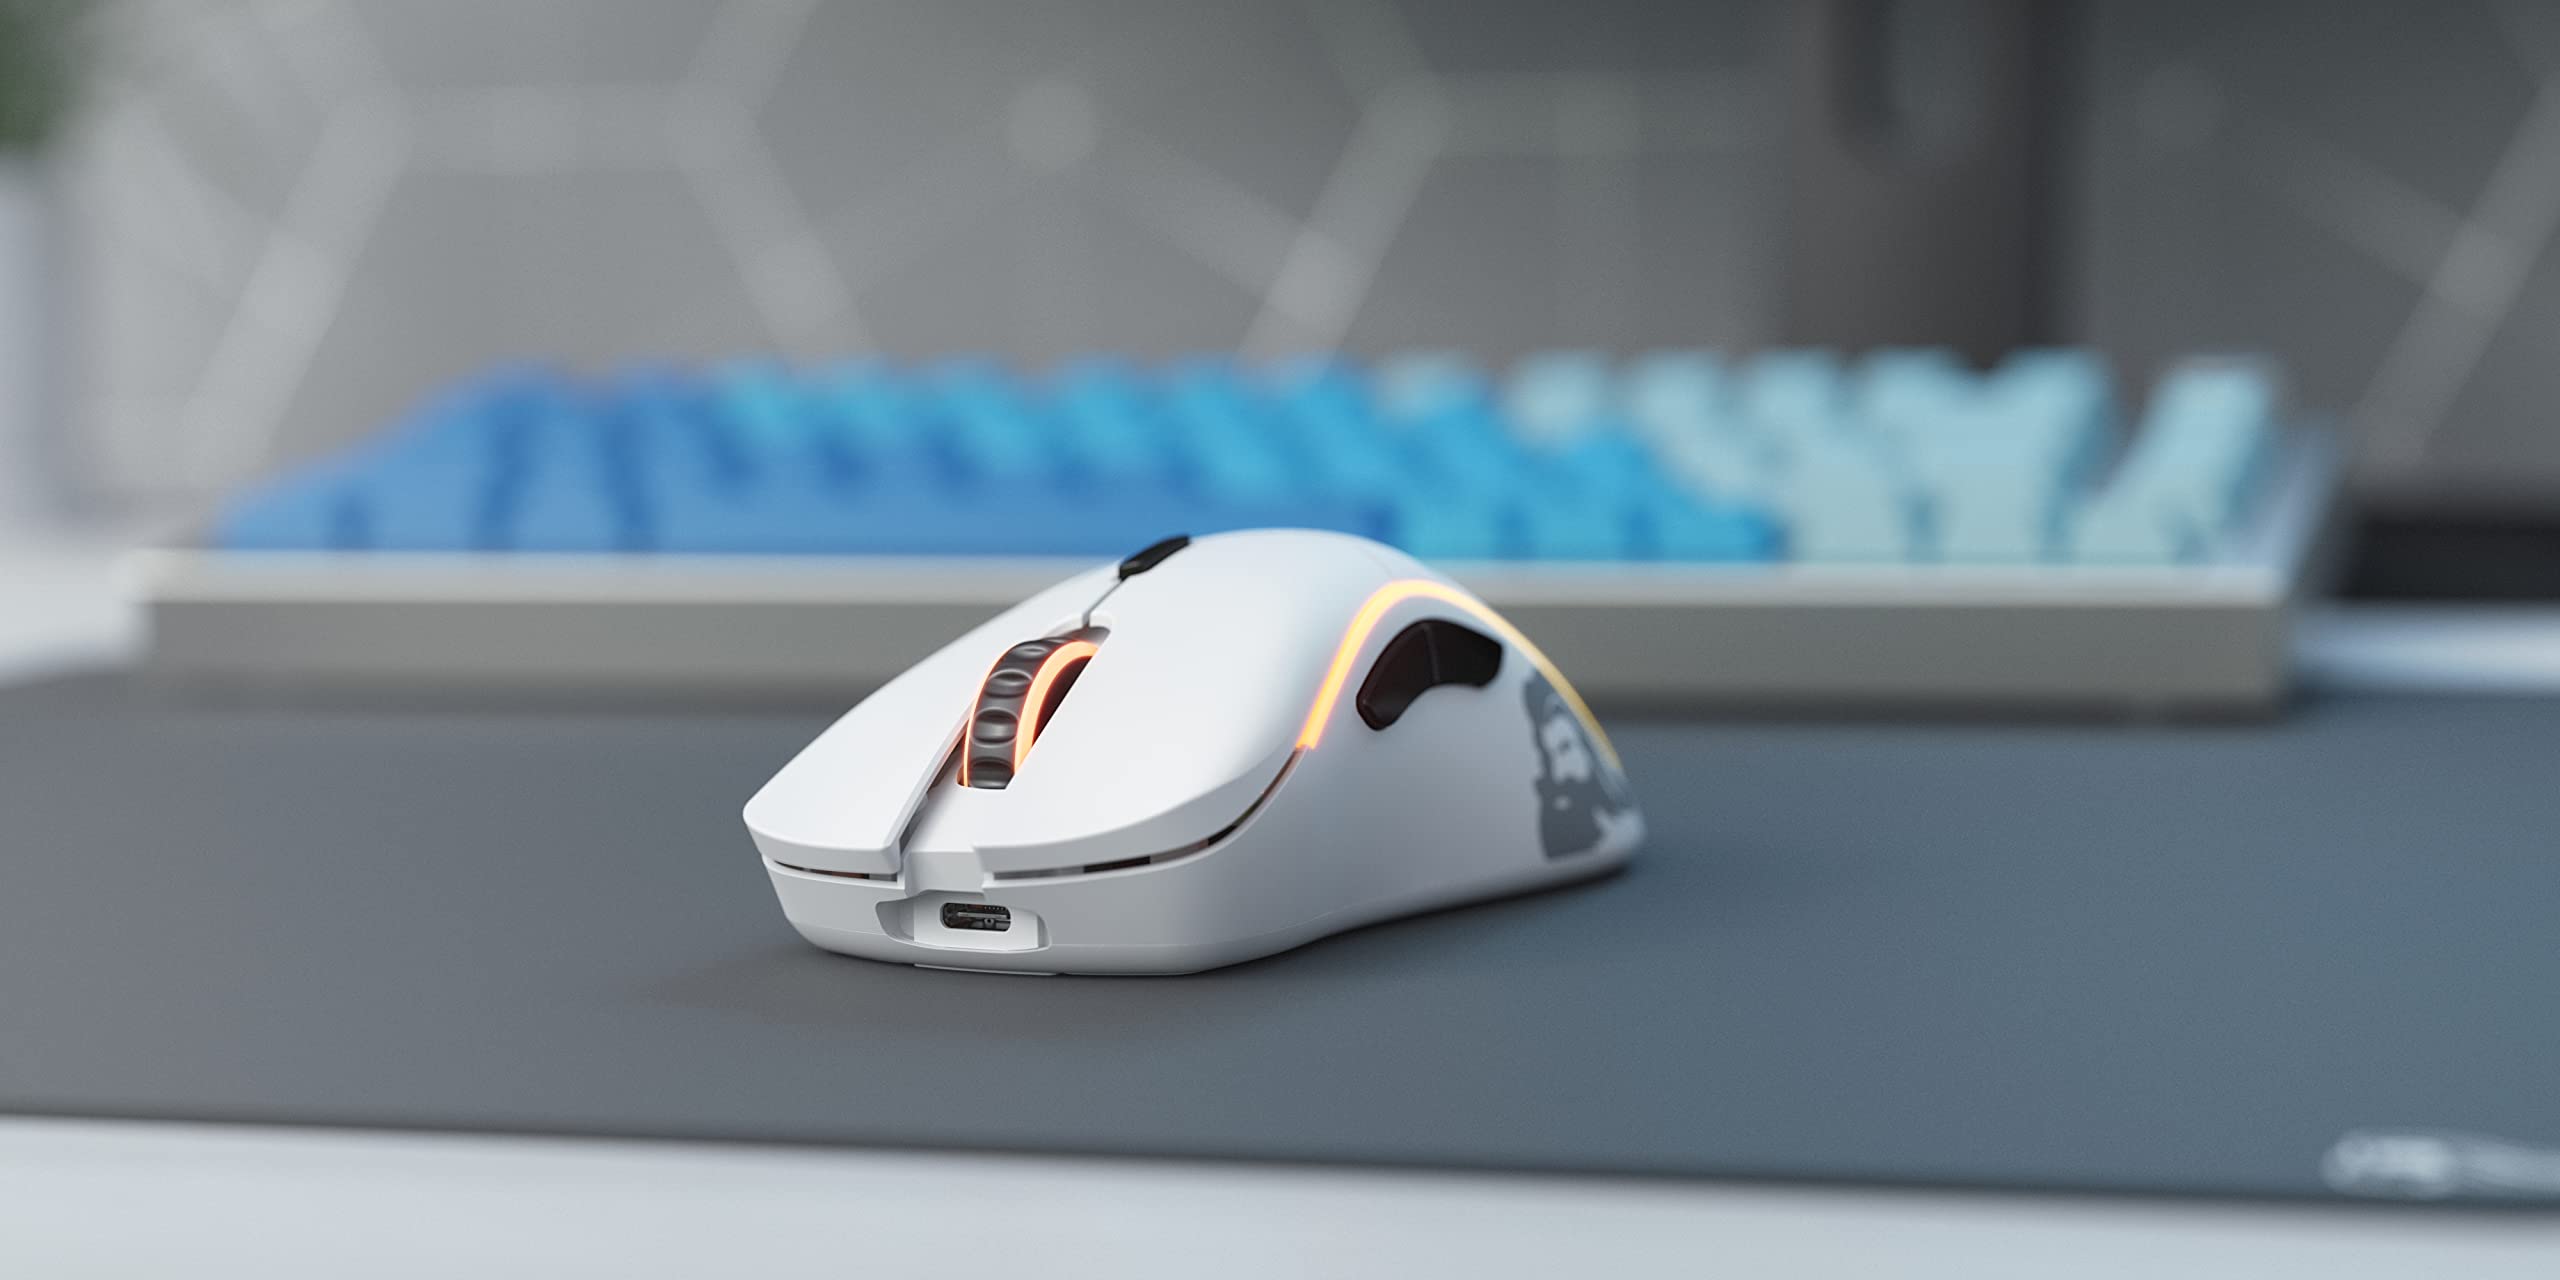 Glorious Gaming Mouse - Model D - RGB Gaming Mouse - 69 g Lightweight Wireless Mouse - Ergonomic Mouse - Honeycomb Mouse - White Wireless Gaming Mouse (Matte White)